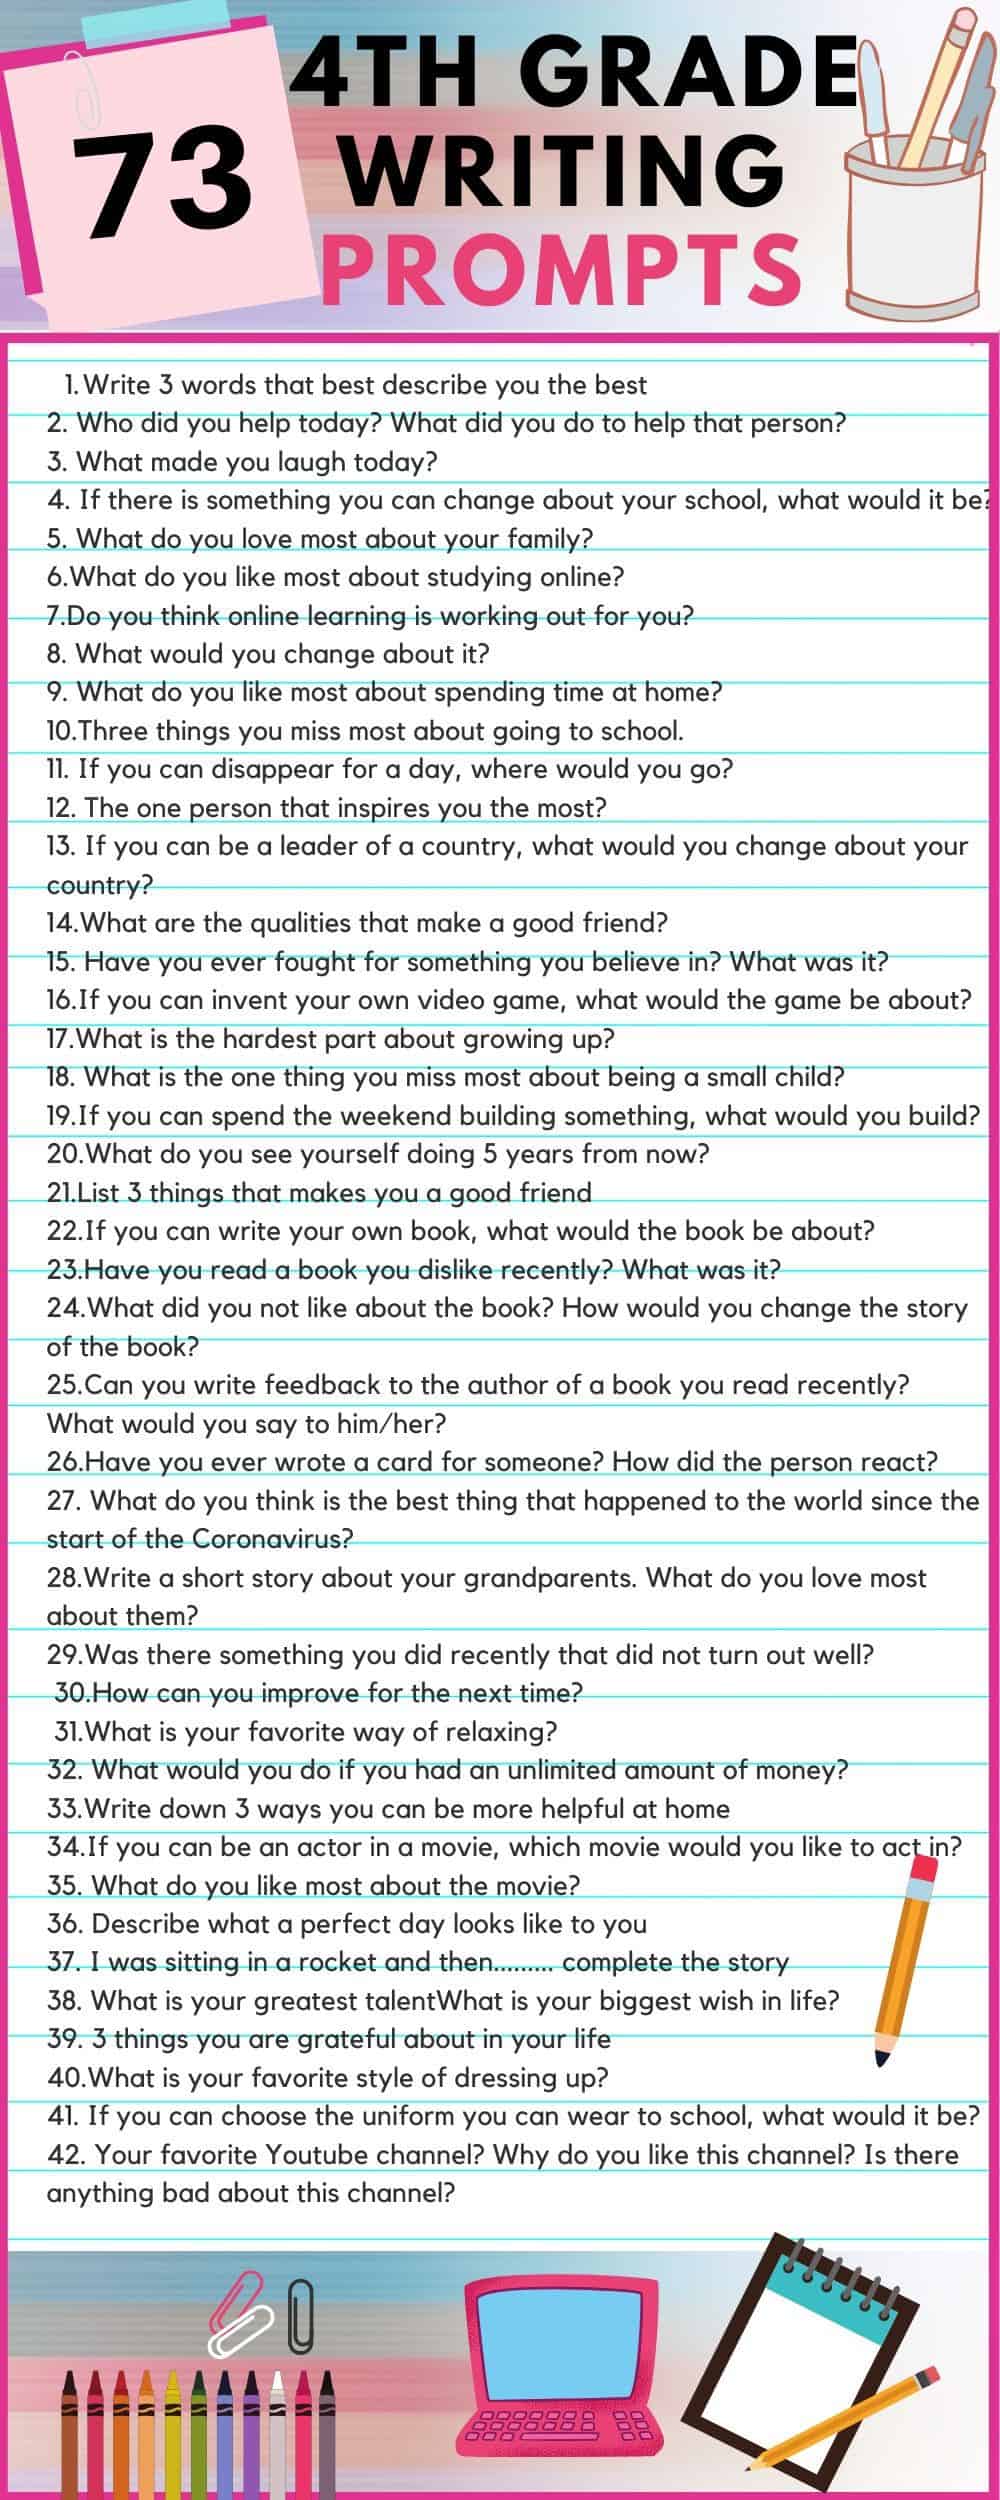 deep writing prompts for high school students